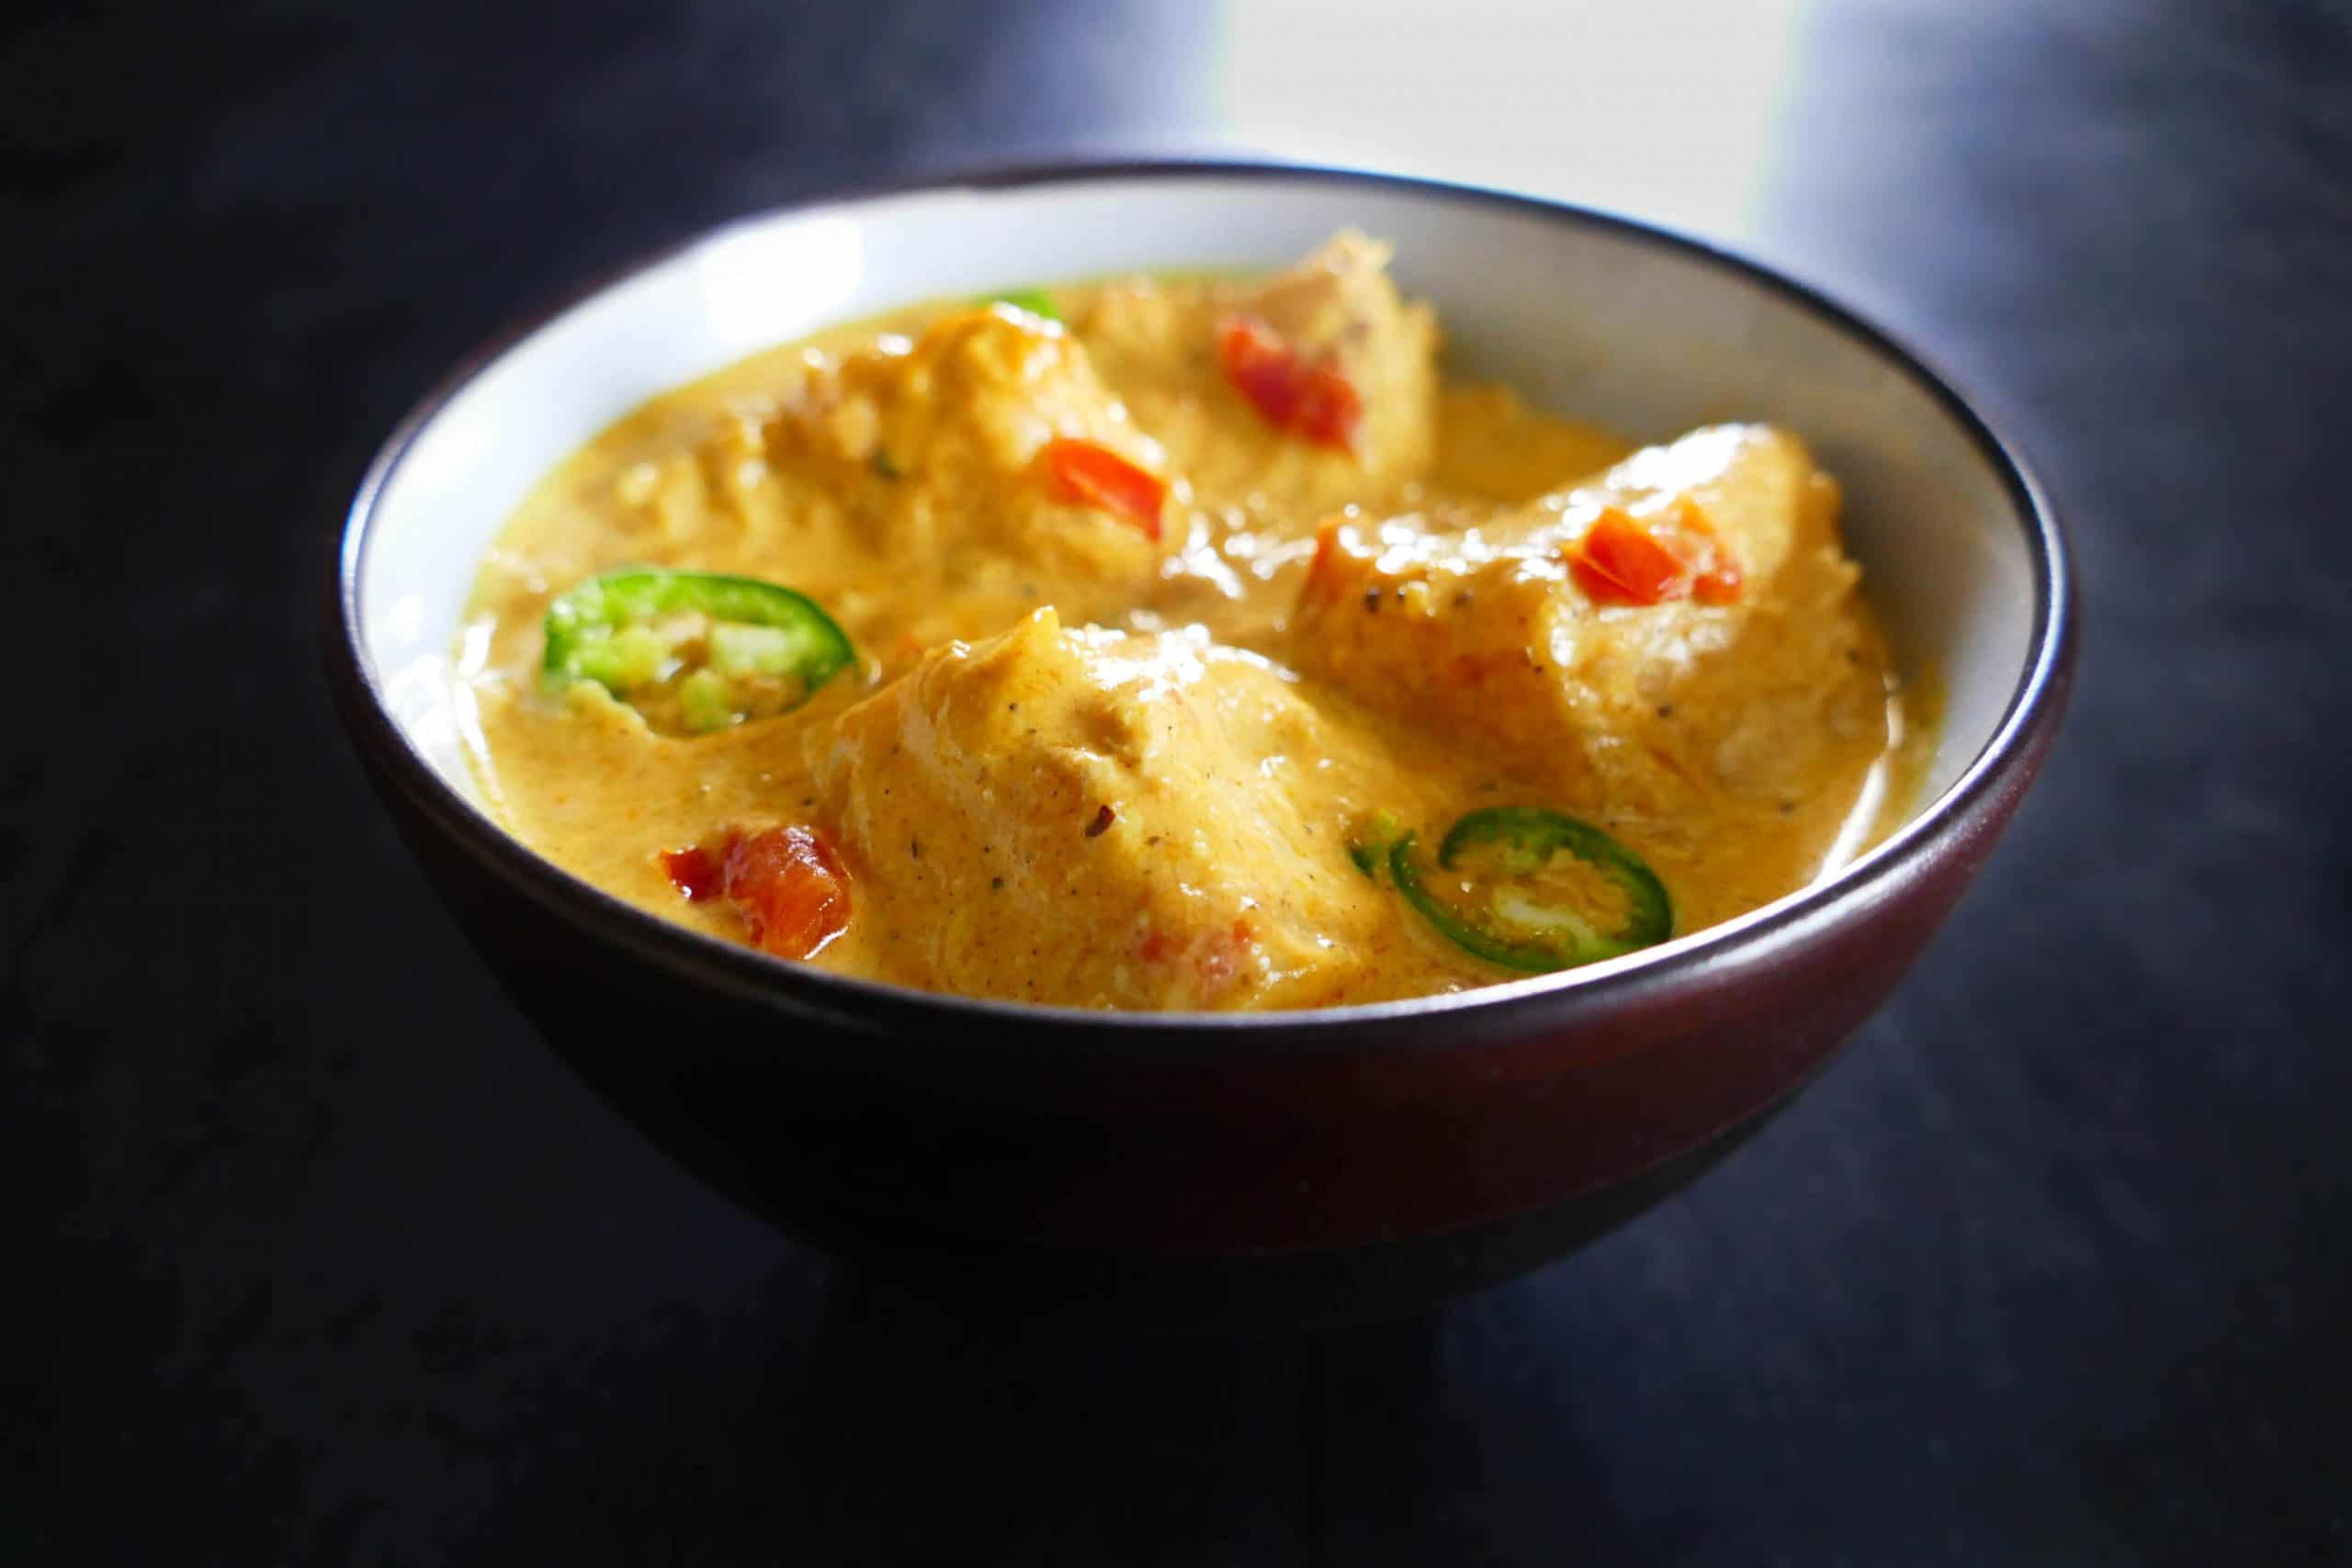 Instant Pot Indian Fish Curry in dark bowl